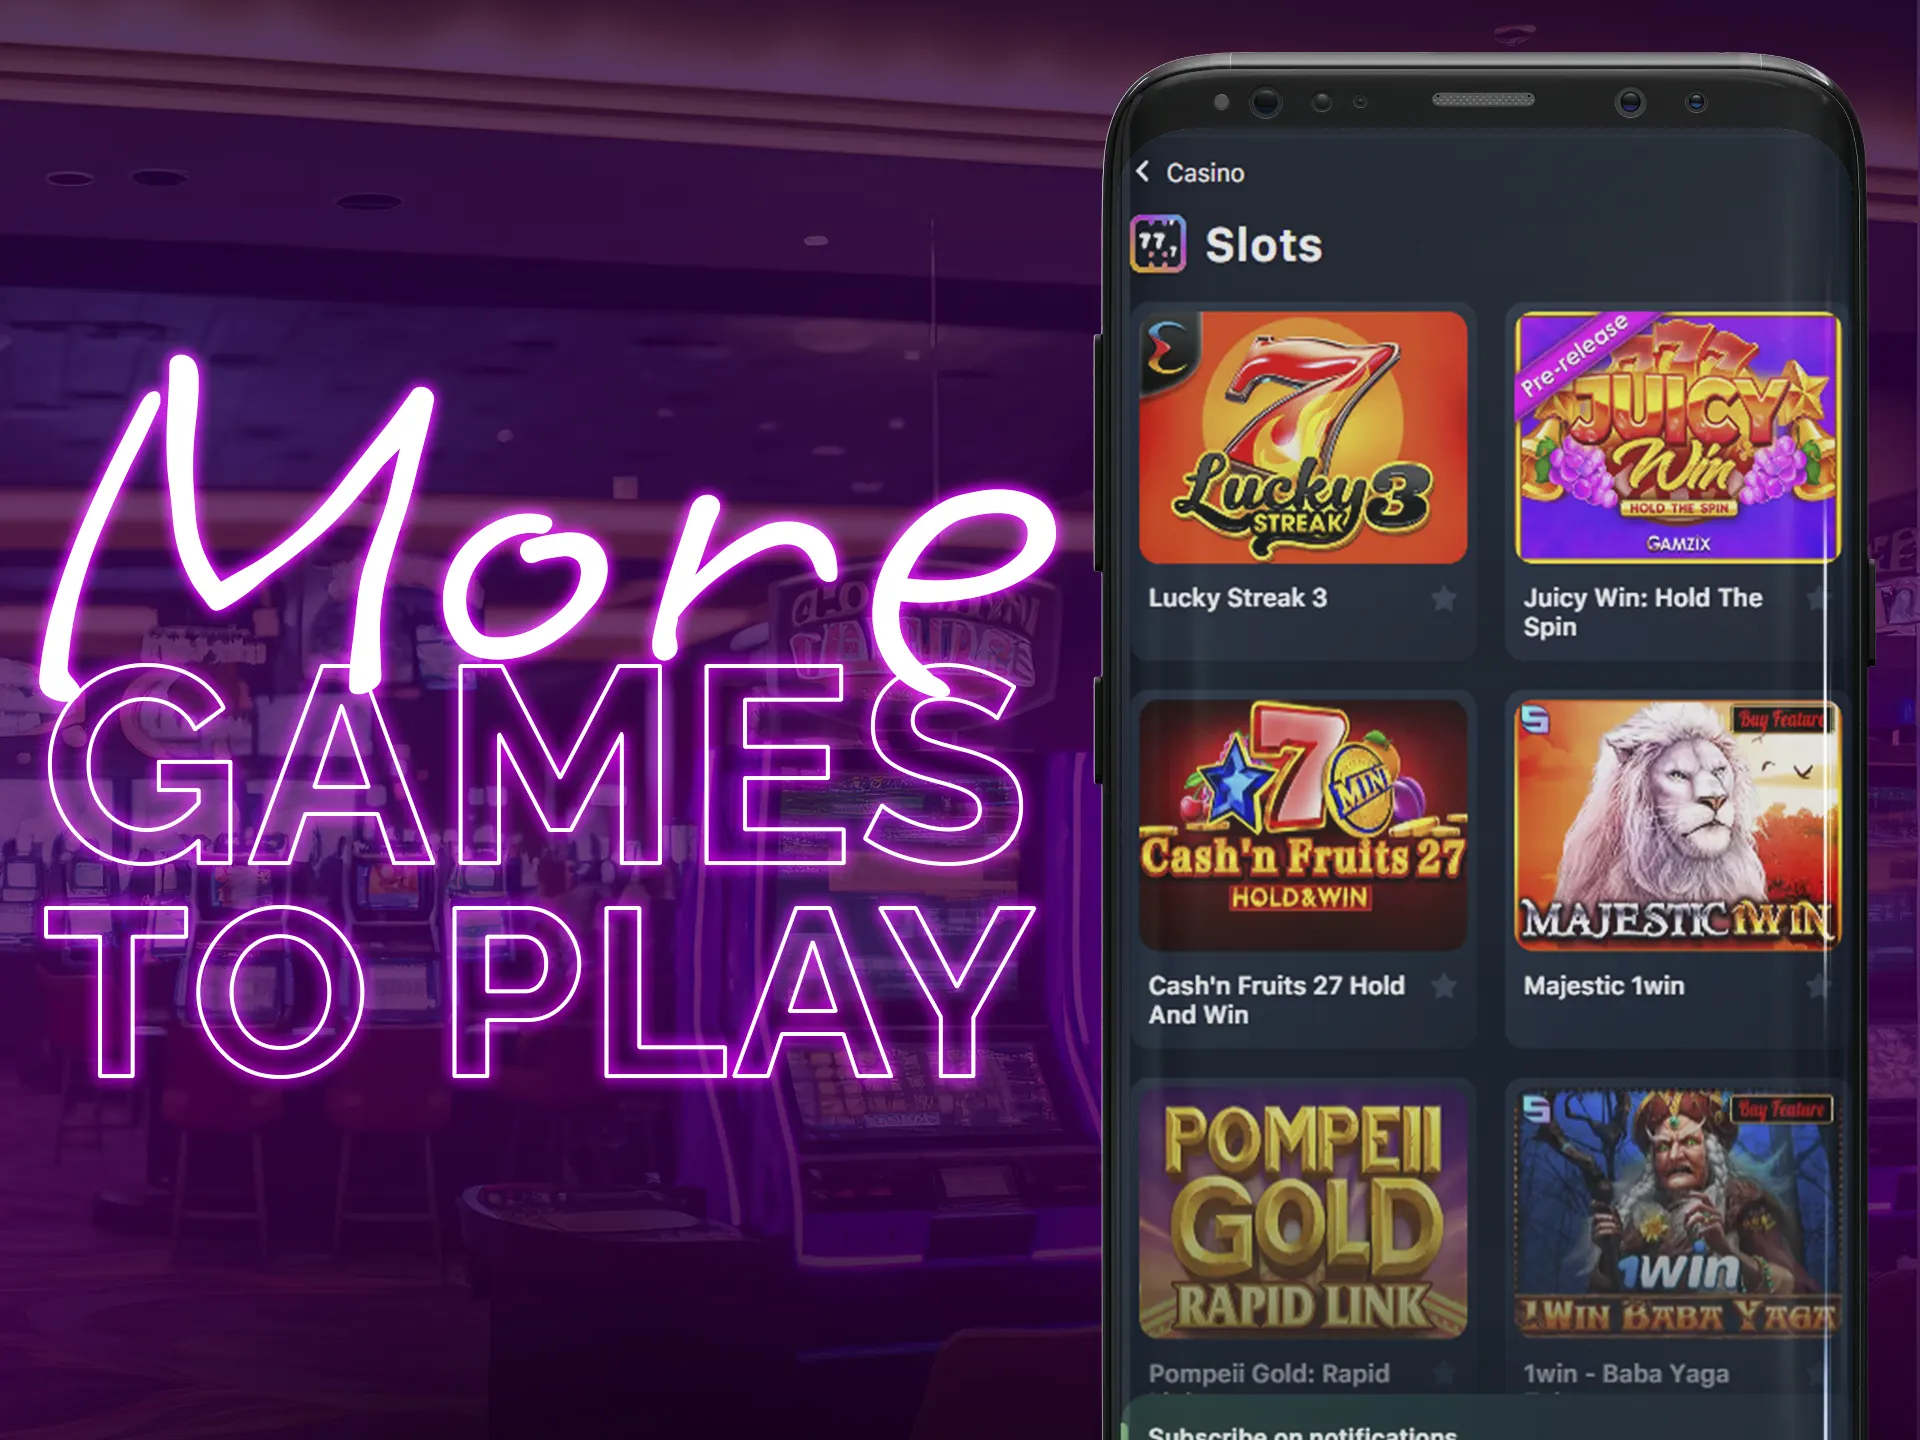 Slots categories are always full of an incredible variety of games.